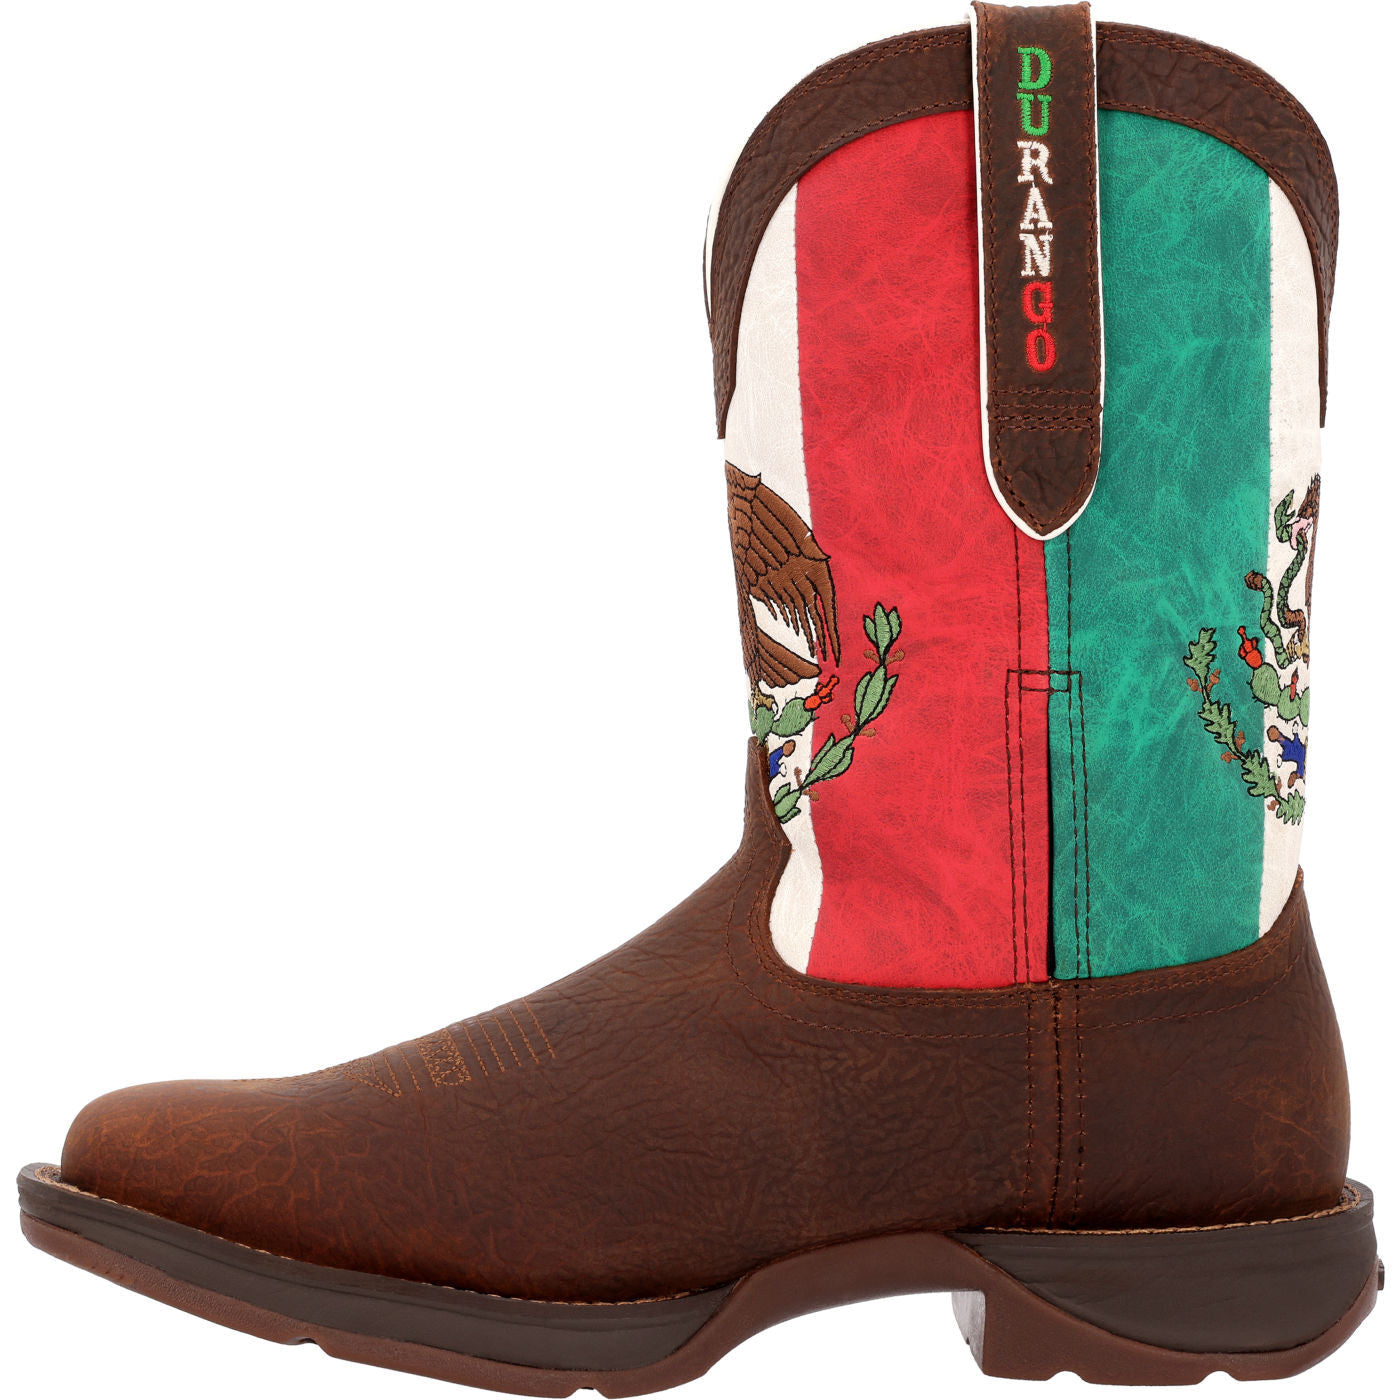 Men's Rebel by Durango Mexico Flag Western Boots (DDB0430)